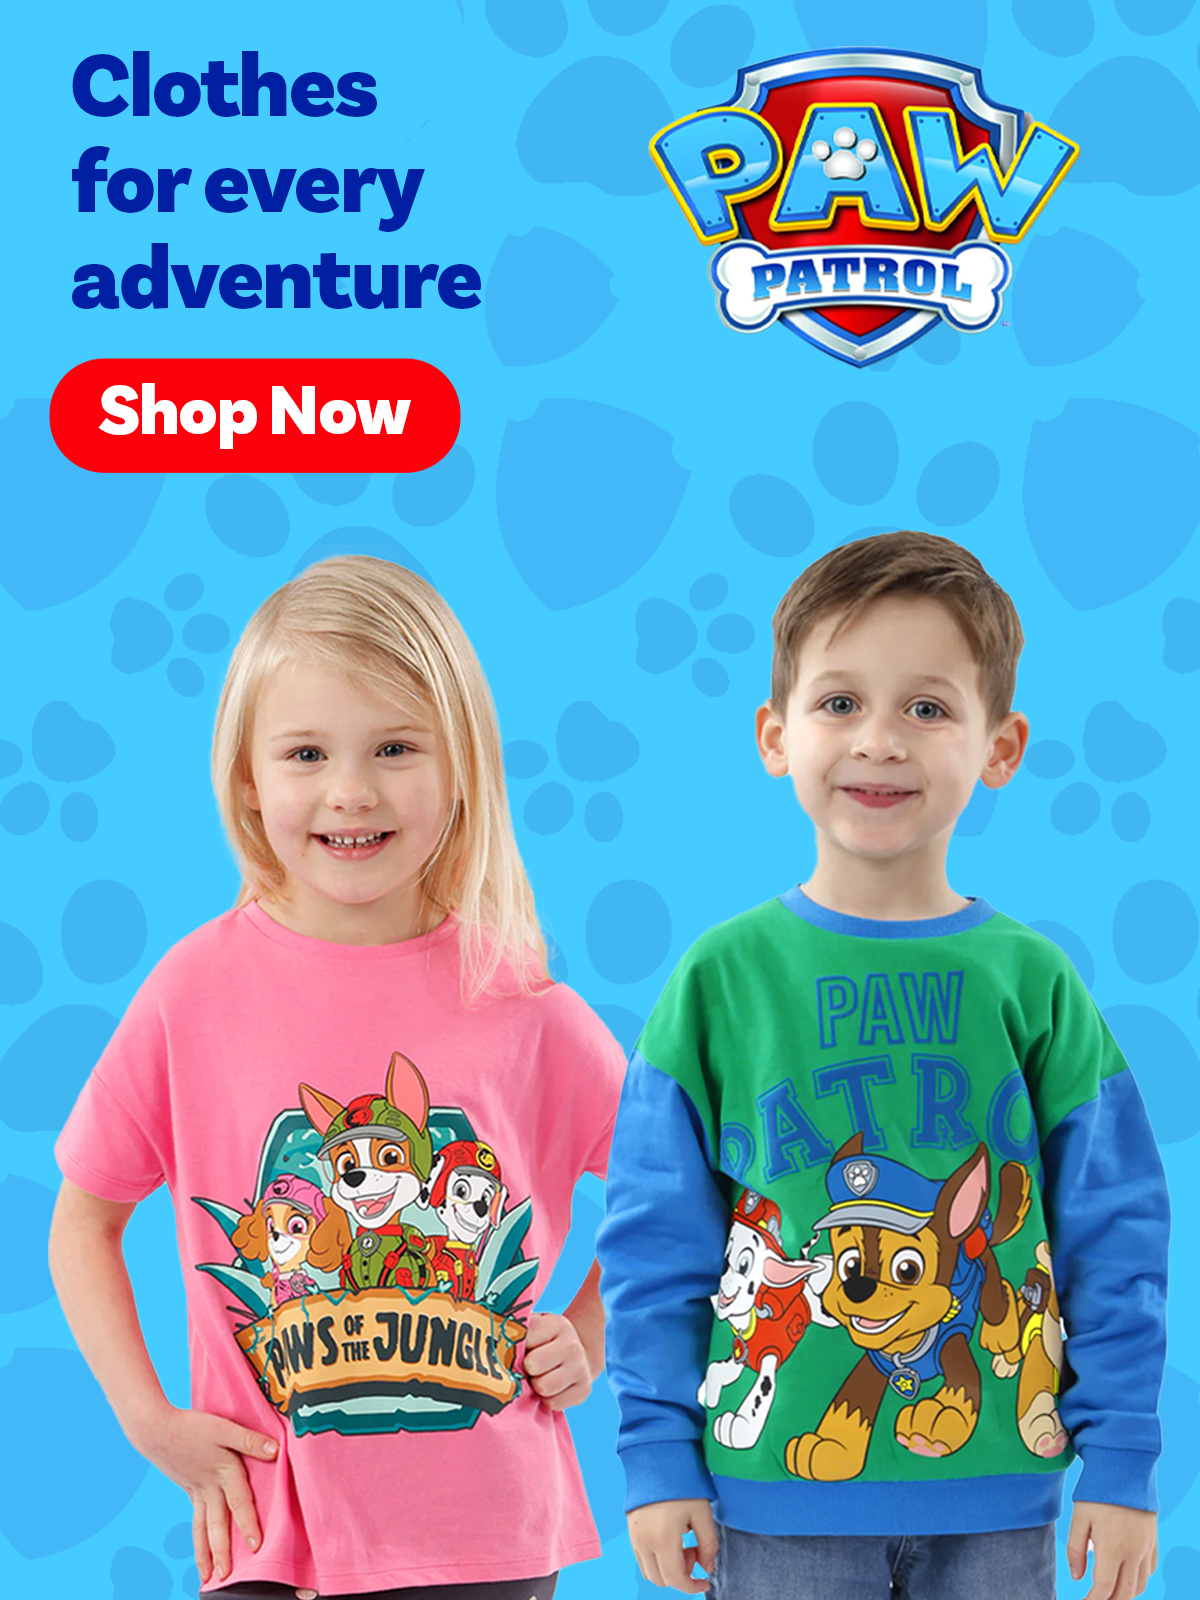 Young Girl and Boy wearing a PAW Patrol, PAWS of the Jungle, pink t-shirt and a green PAW Patrol Sweatshirt. PAW Patrol logo and Clothes for every adventure title.